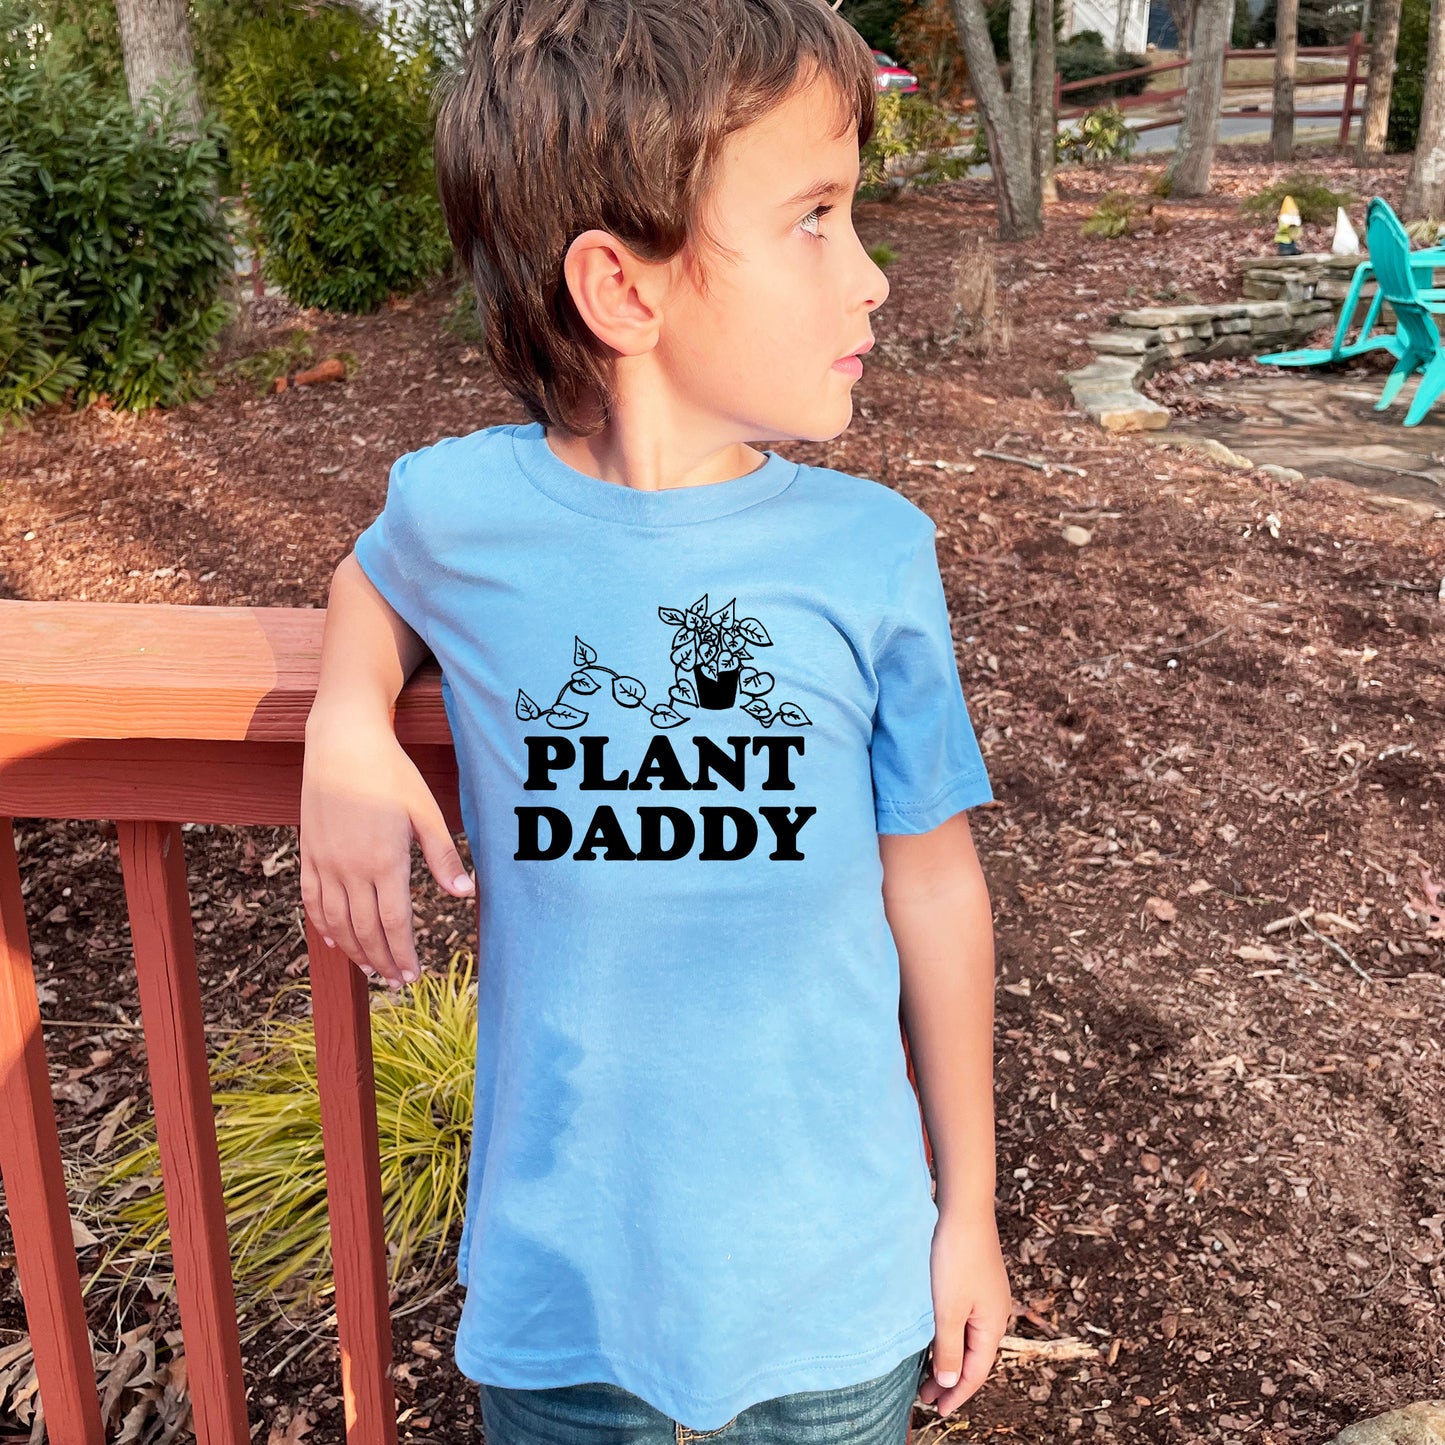 Plant Daddy - Kid's Tee - Columbia Blue or Lavender